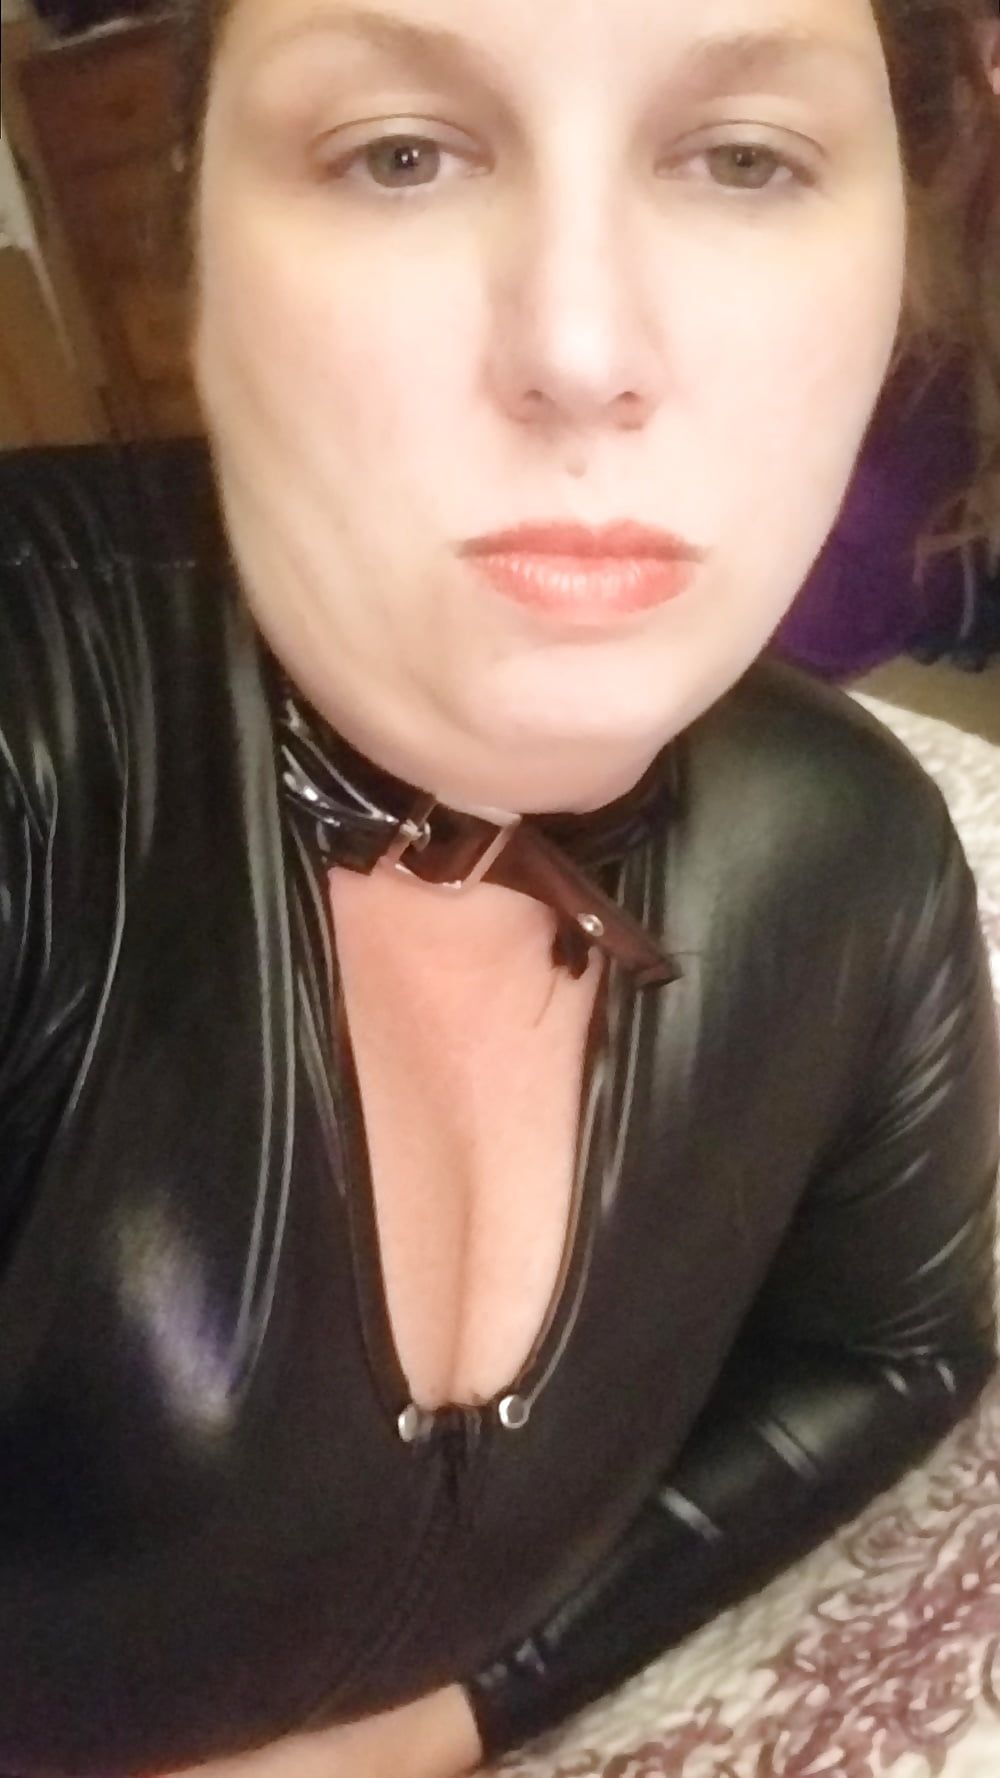 New cat suit birthday surprise for hubby - milf housewife  #15